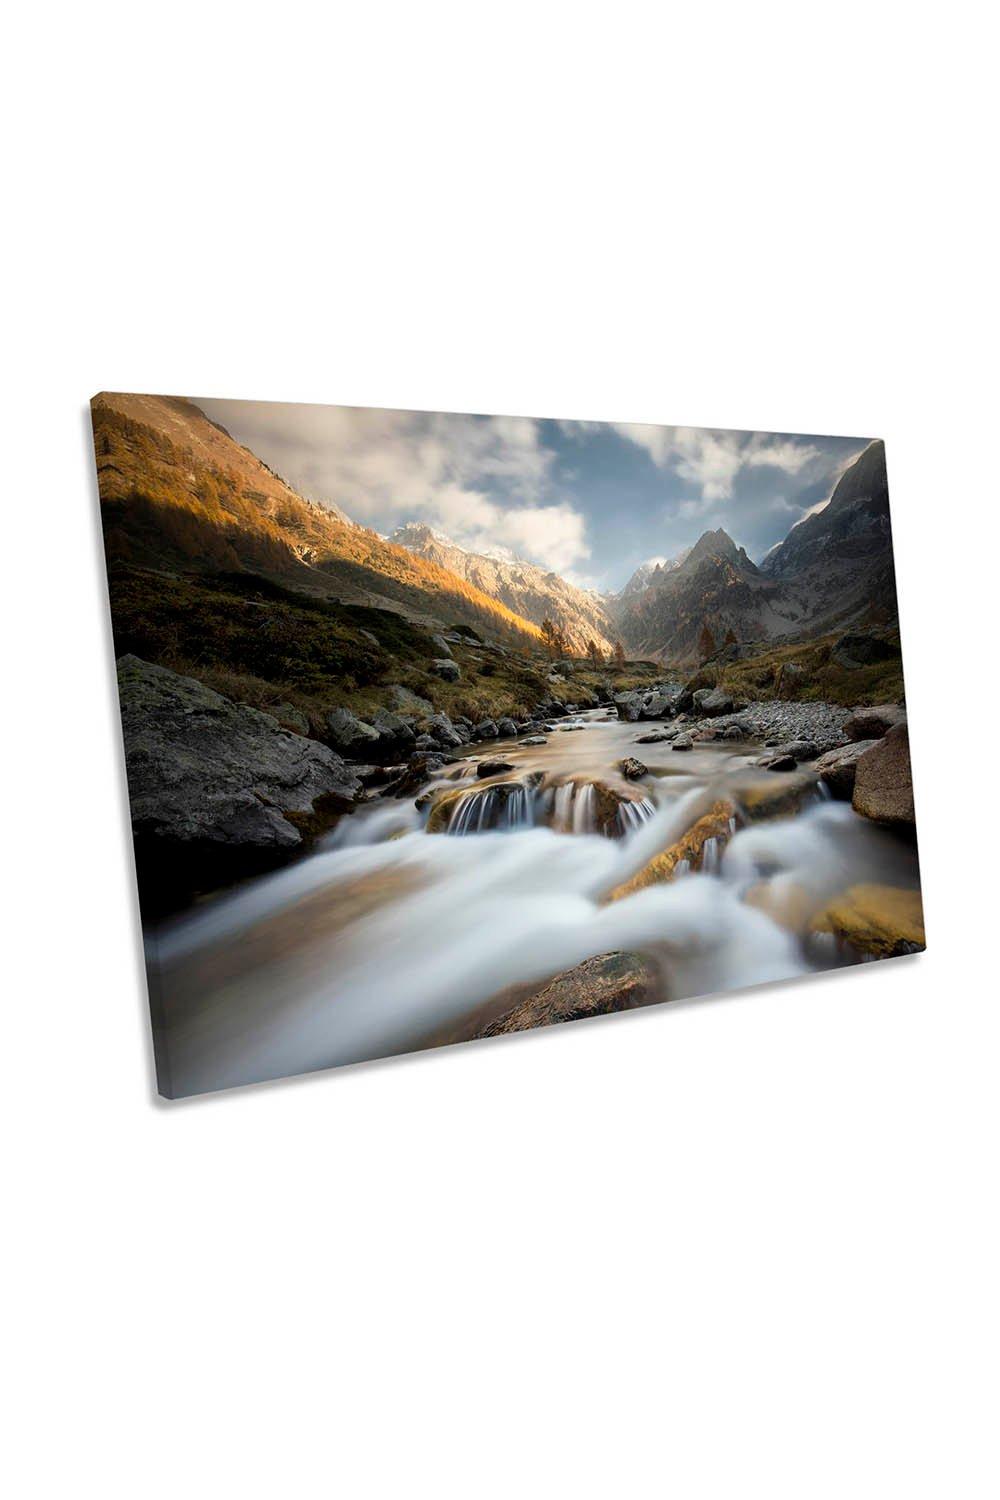 Autumn in the Alps Mountain River Landscape Canvas Wall Art Picture Print